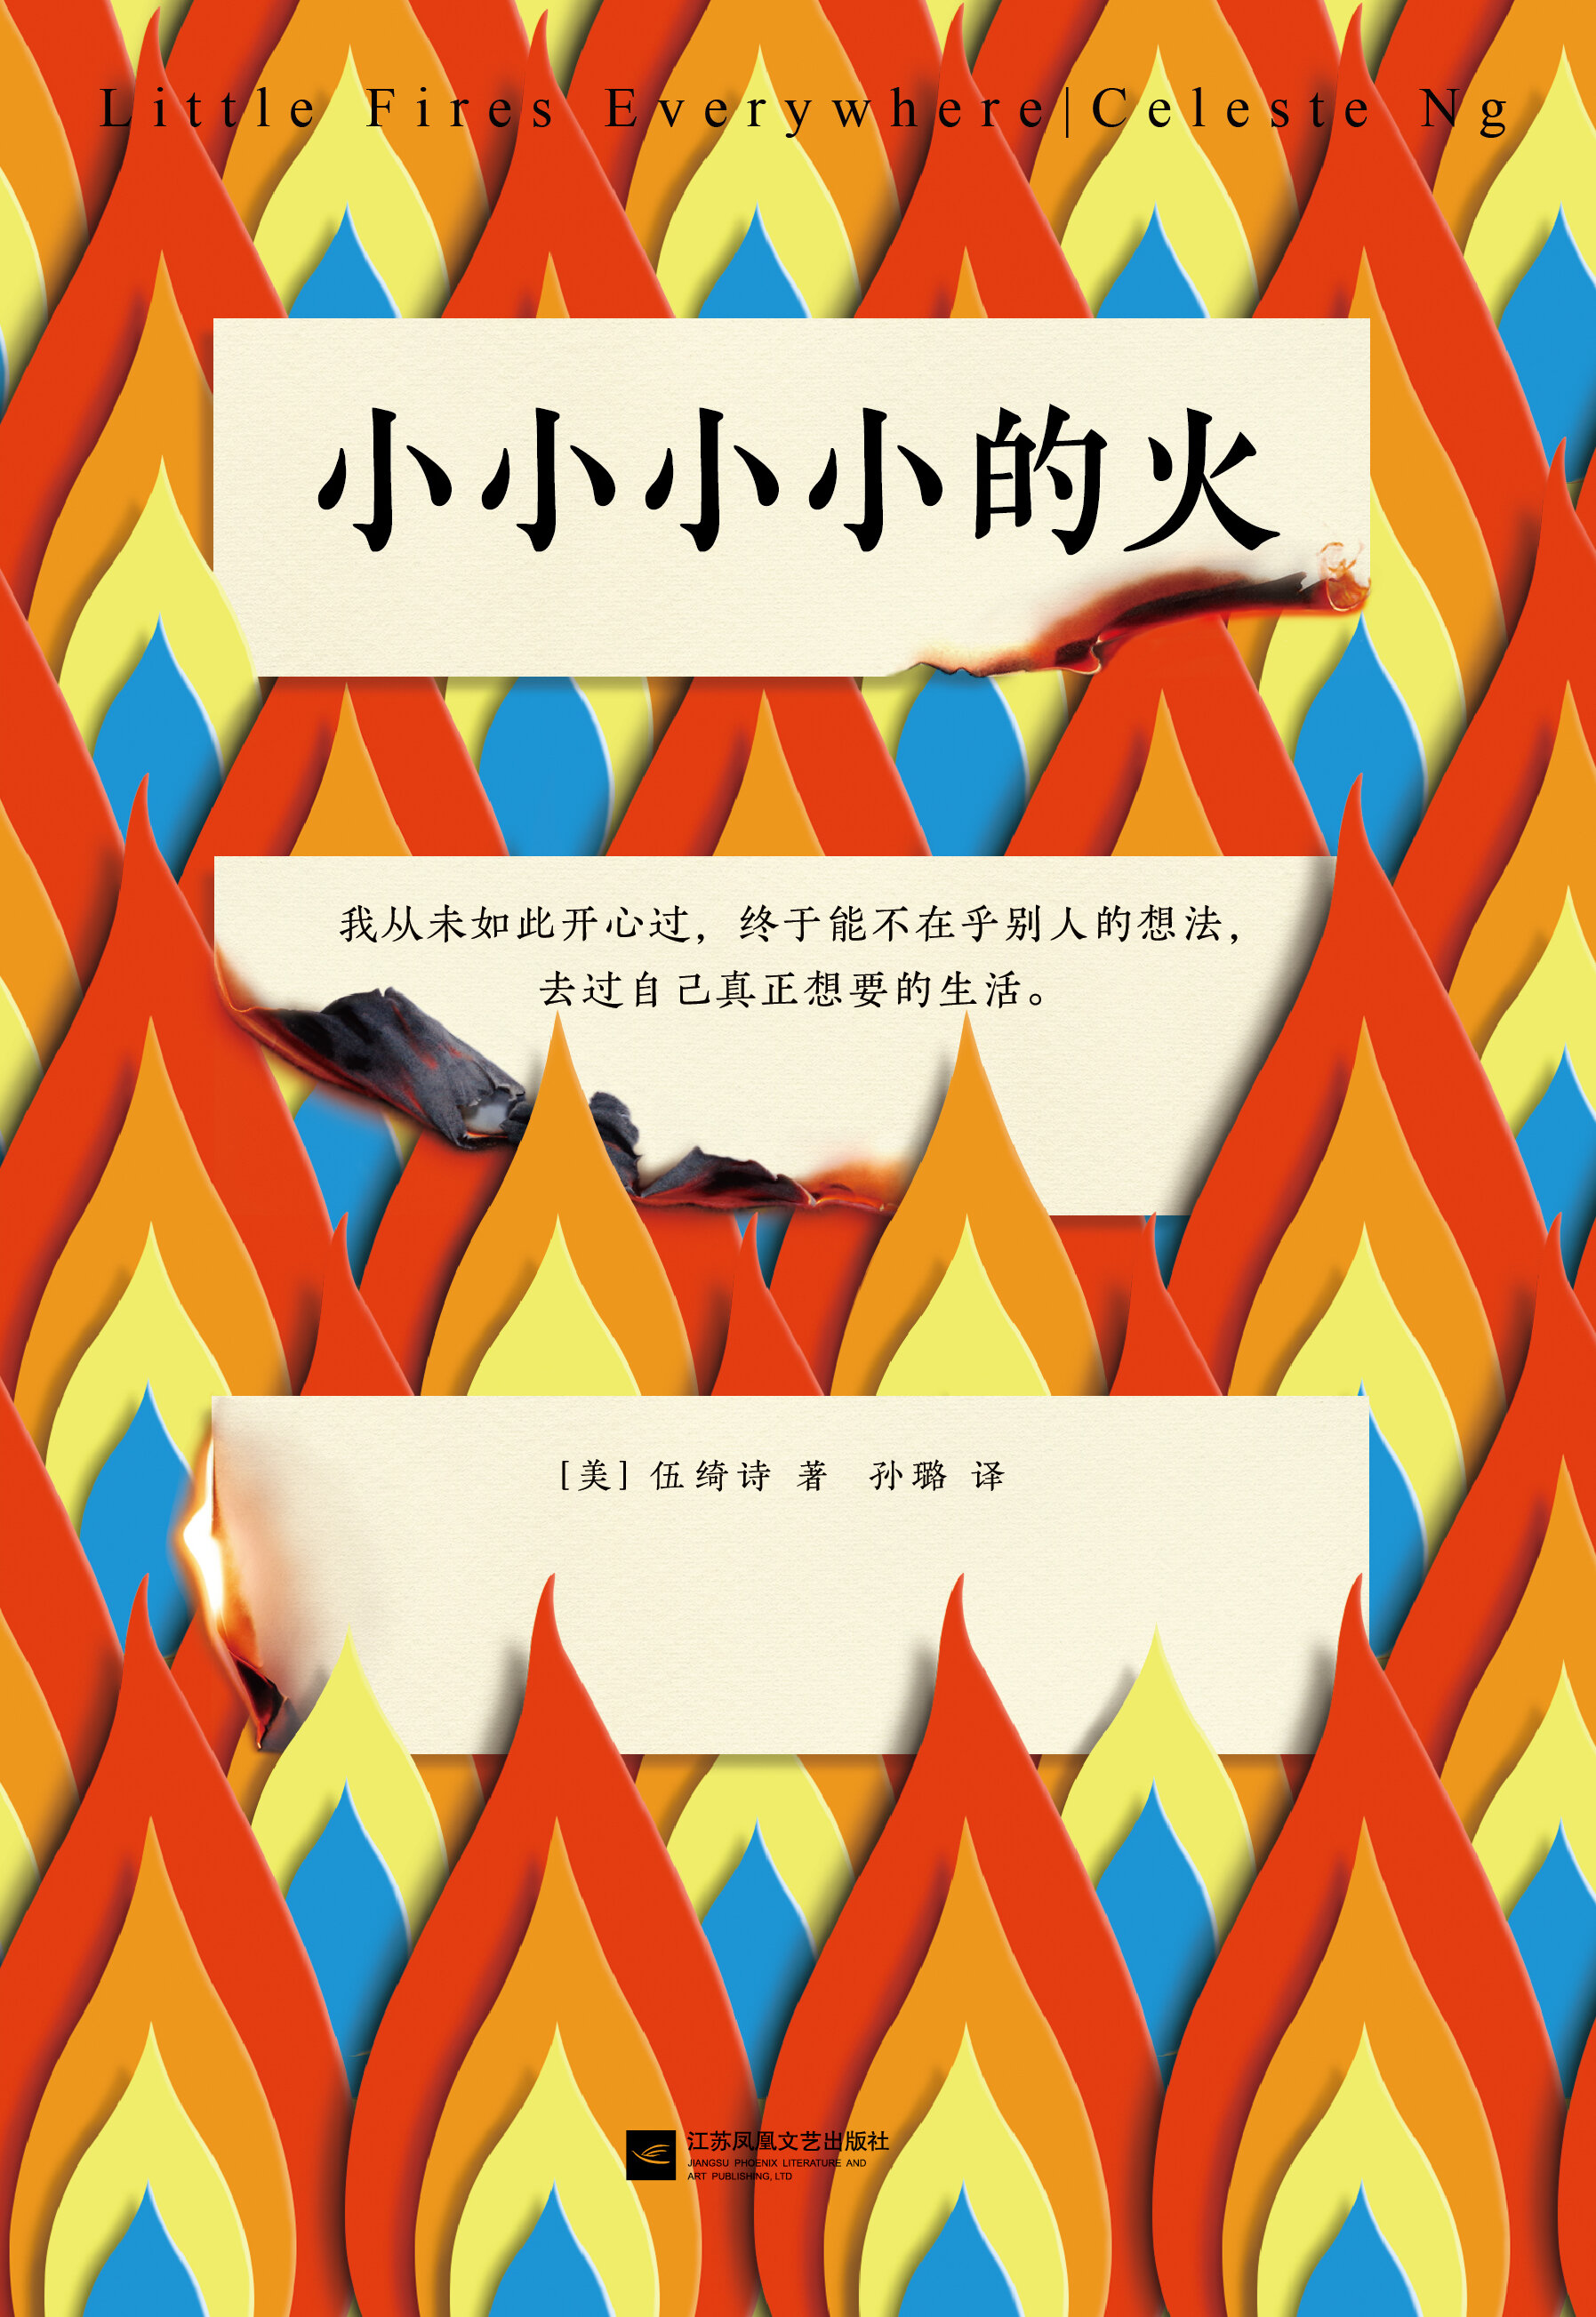 Little Fires Everywhere - Simplified Chinese (小小小小的火) front.jpg